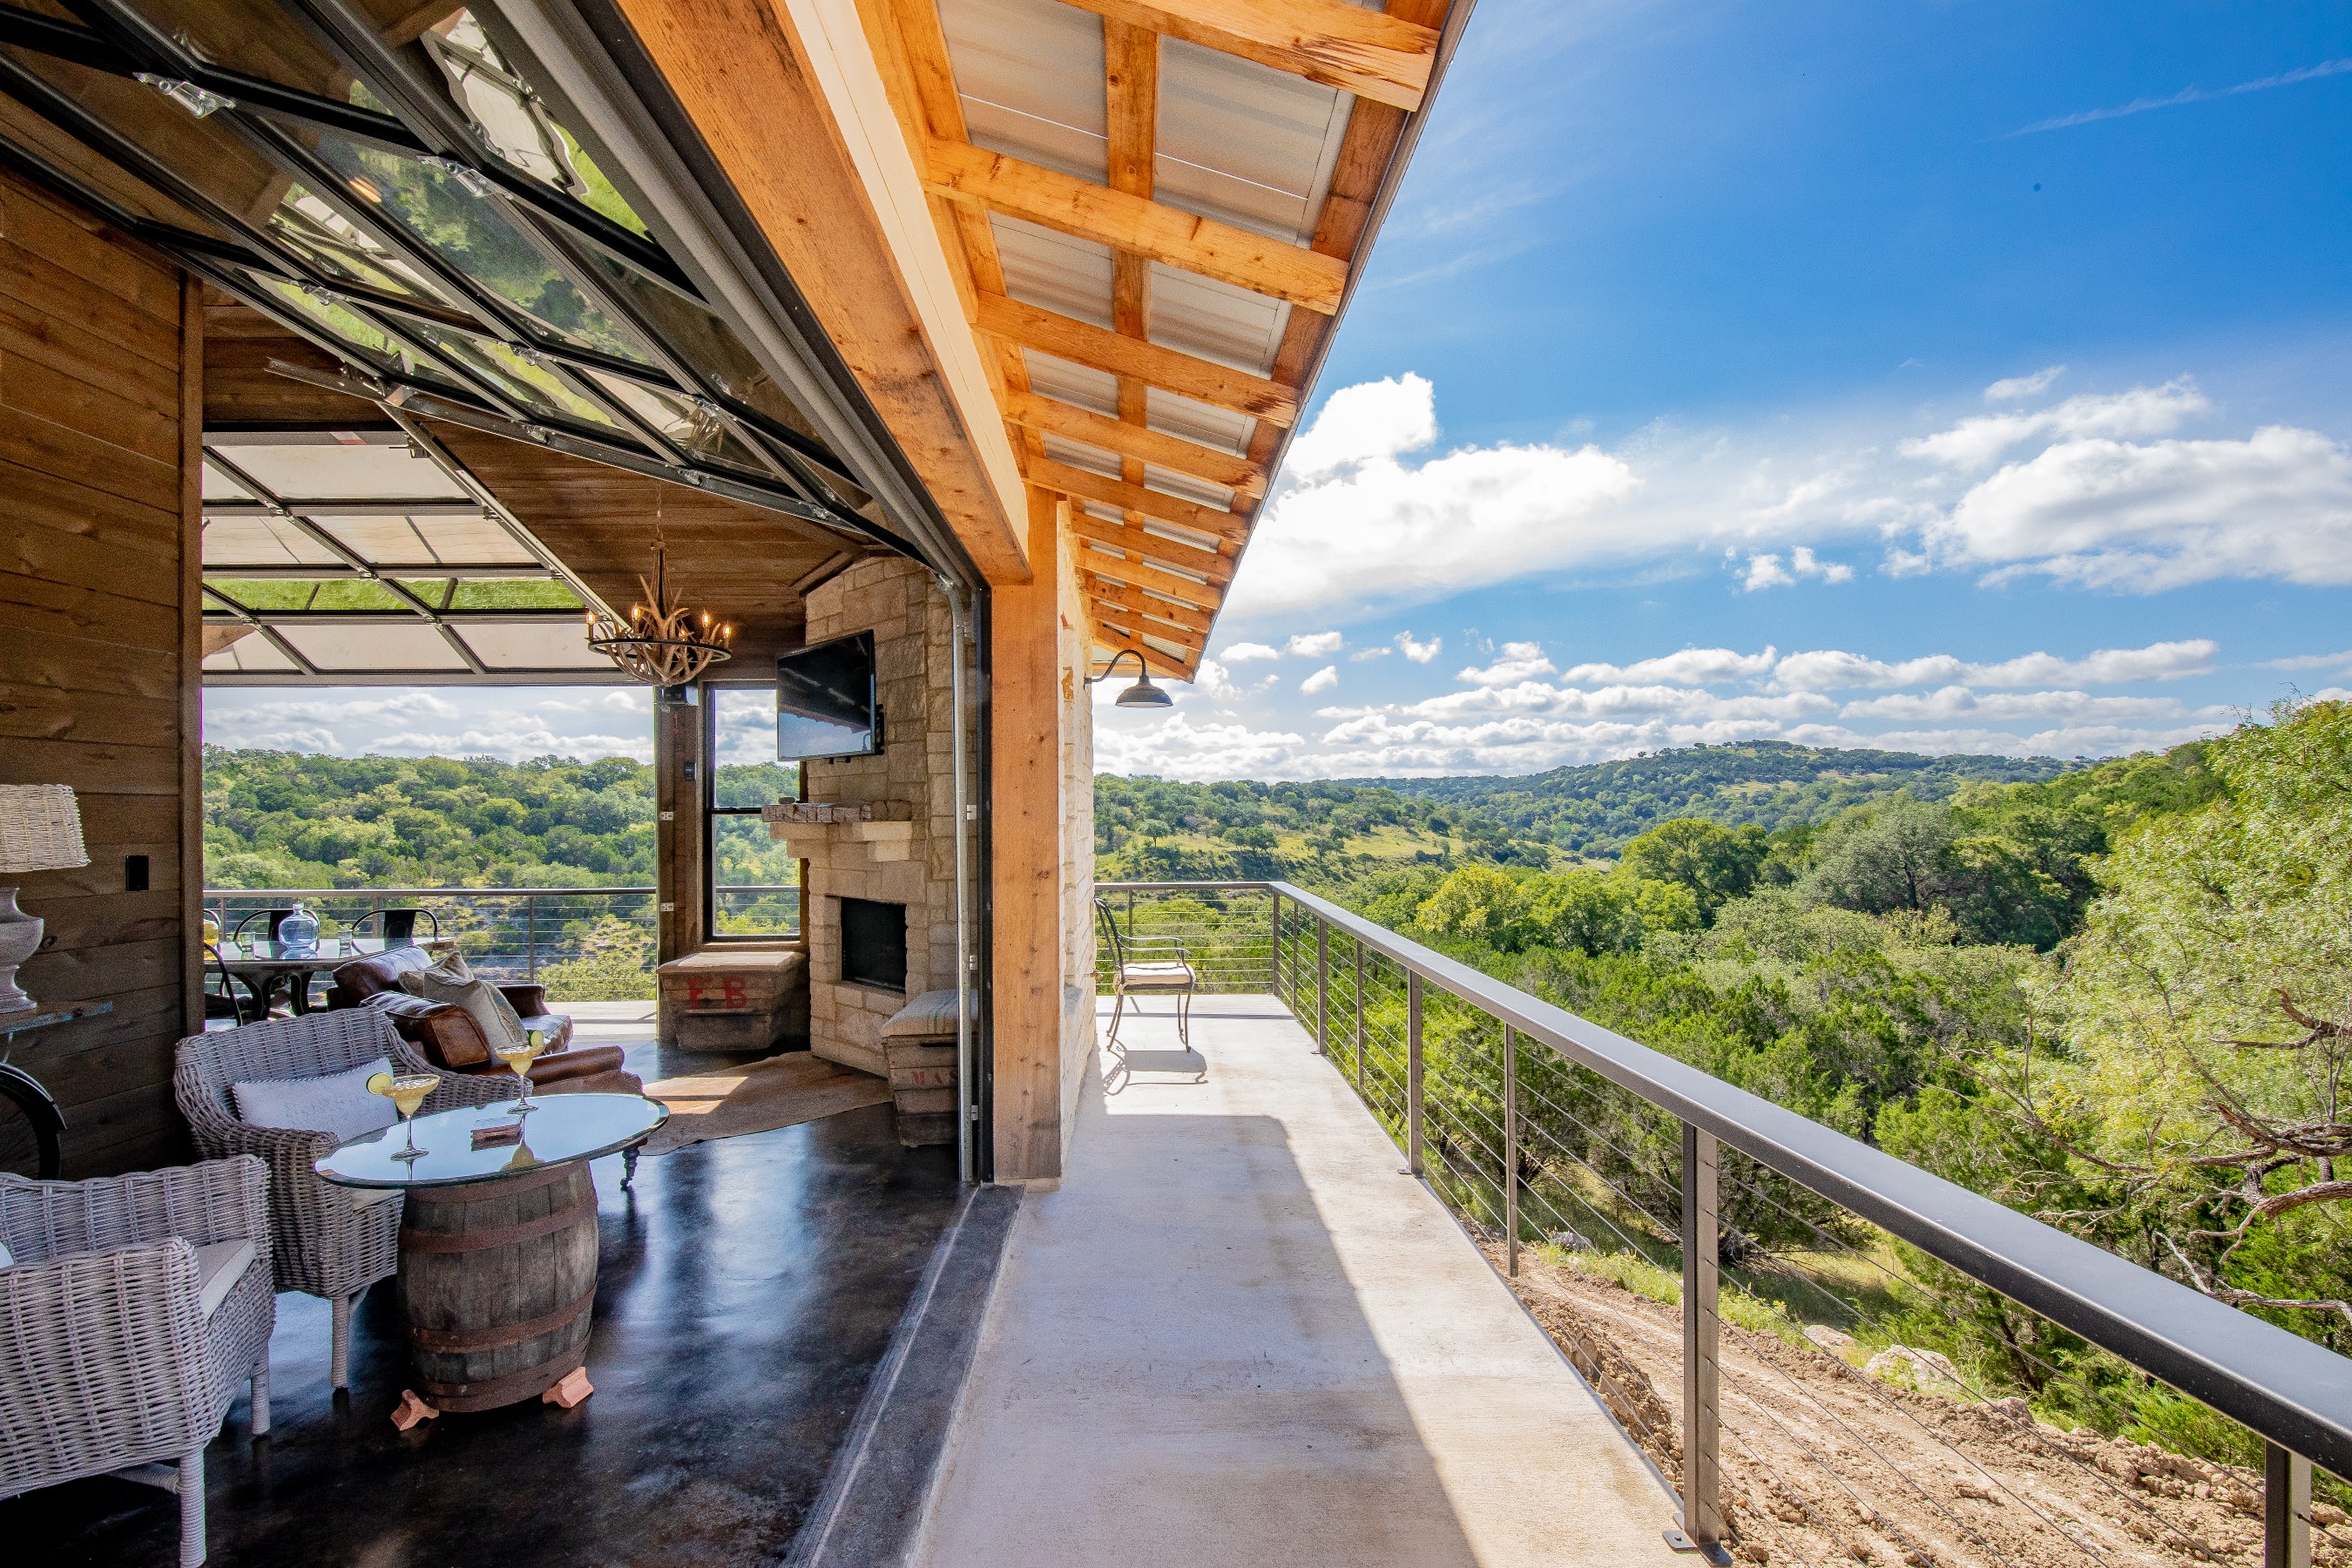 Dripping Springs, Texas – "Riverfront Hideaway" – less than an hour’s drive from Austin – offers direct river access and stunning Hill Country views from the home’s large outdoor terrace.